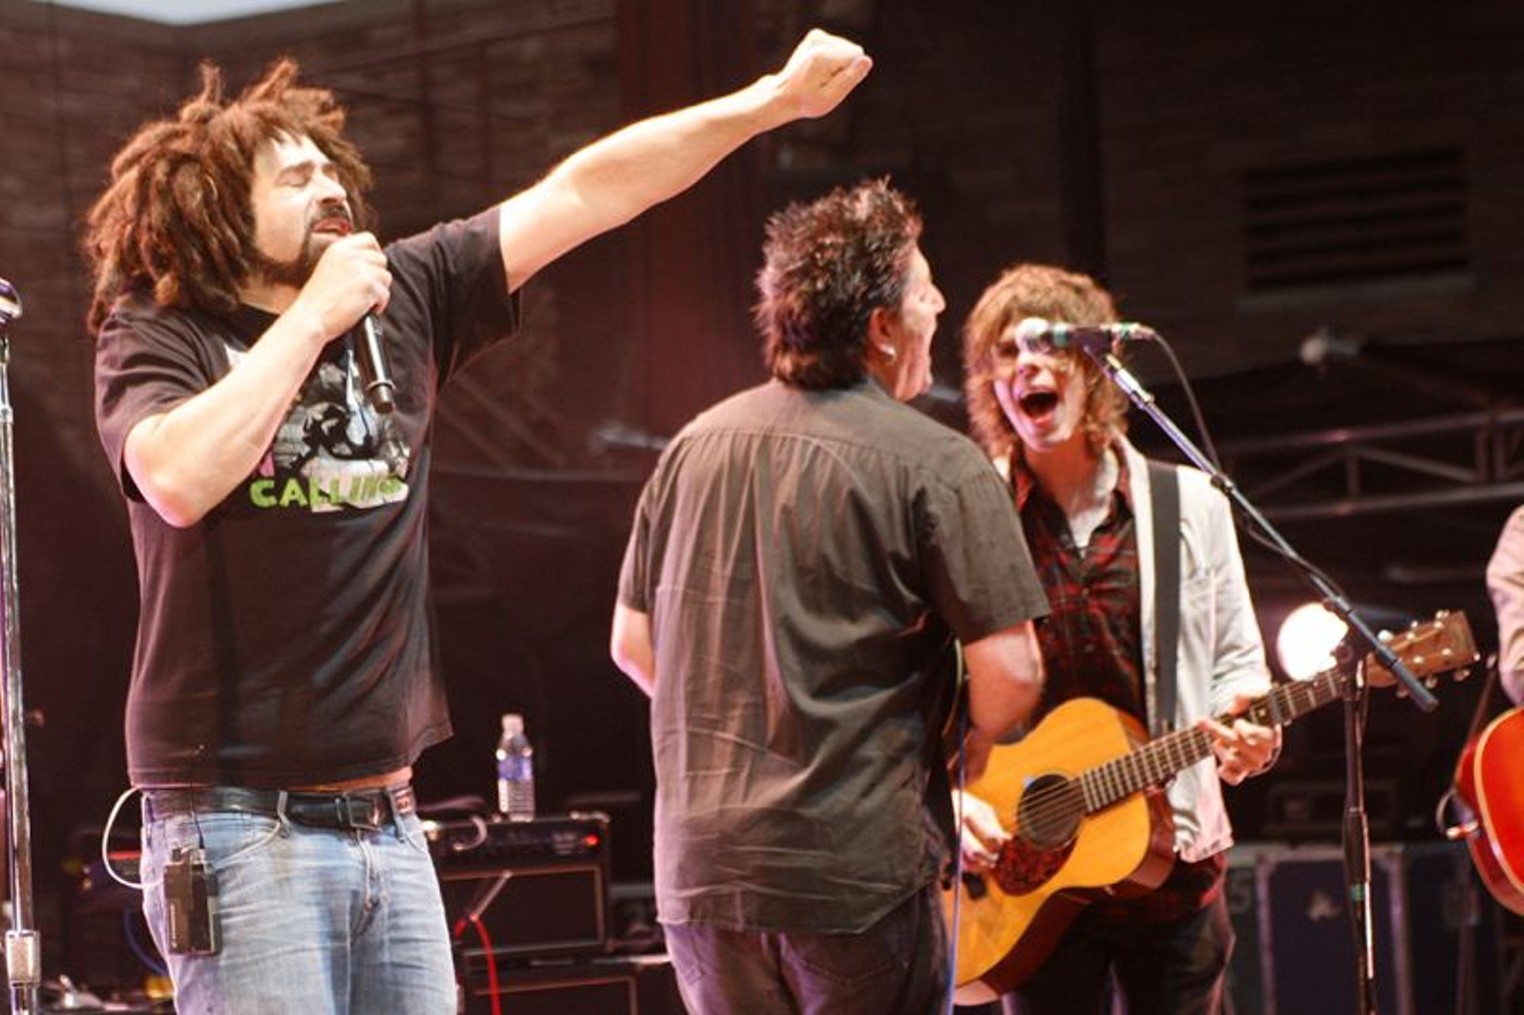 Counting Crows at Red Rocks Denver Denver Westword The Leading